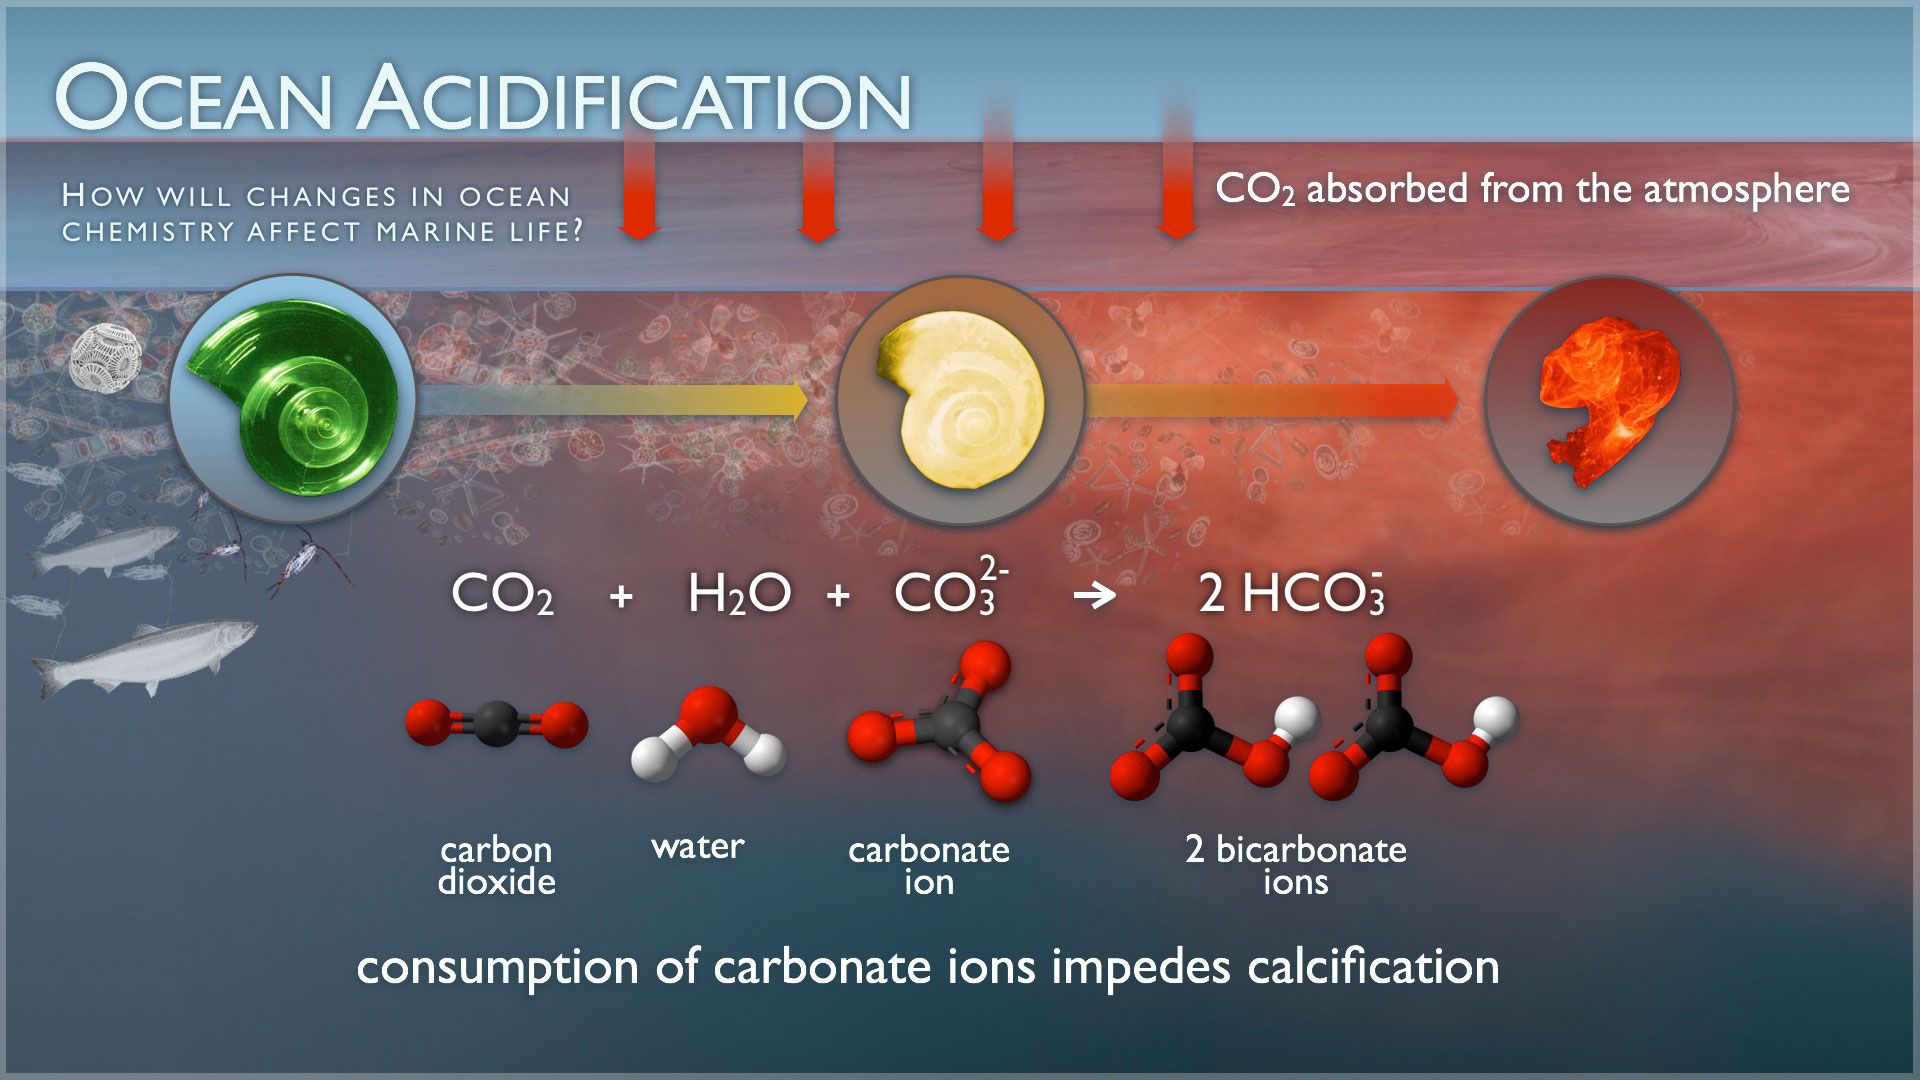 Diagram created by the National Oceanic and Atmospheric Administration (NOAA) to explain the mechanisms leading to ocean acidification and the impact on calcifying organisms. In brief, the ocean absorbs carbon dioxide (CO2) from the atmosphere and reacts with water (H2O) and carbonate (CO32-) to produce bicarbonate (HCO3-). Rising atmospheric CO2 levels have increased the amount of dissolved CO2 in the ocean, shifting the balance of the carbonate chemistry system toward producing more HCO3- and less CO32-. This shift has led to lower seawater pH, which can negatively impact shell development and many other biological processes. 